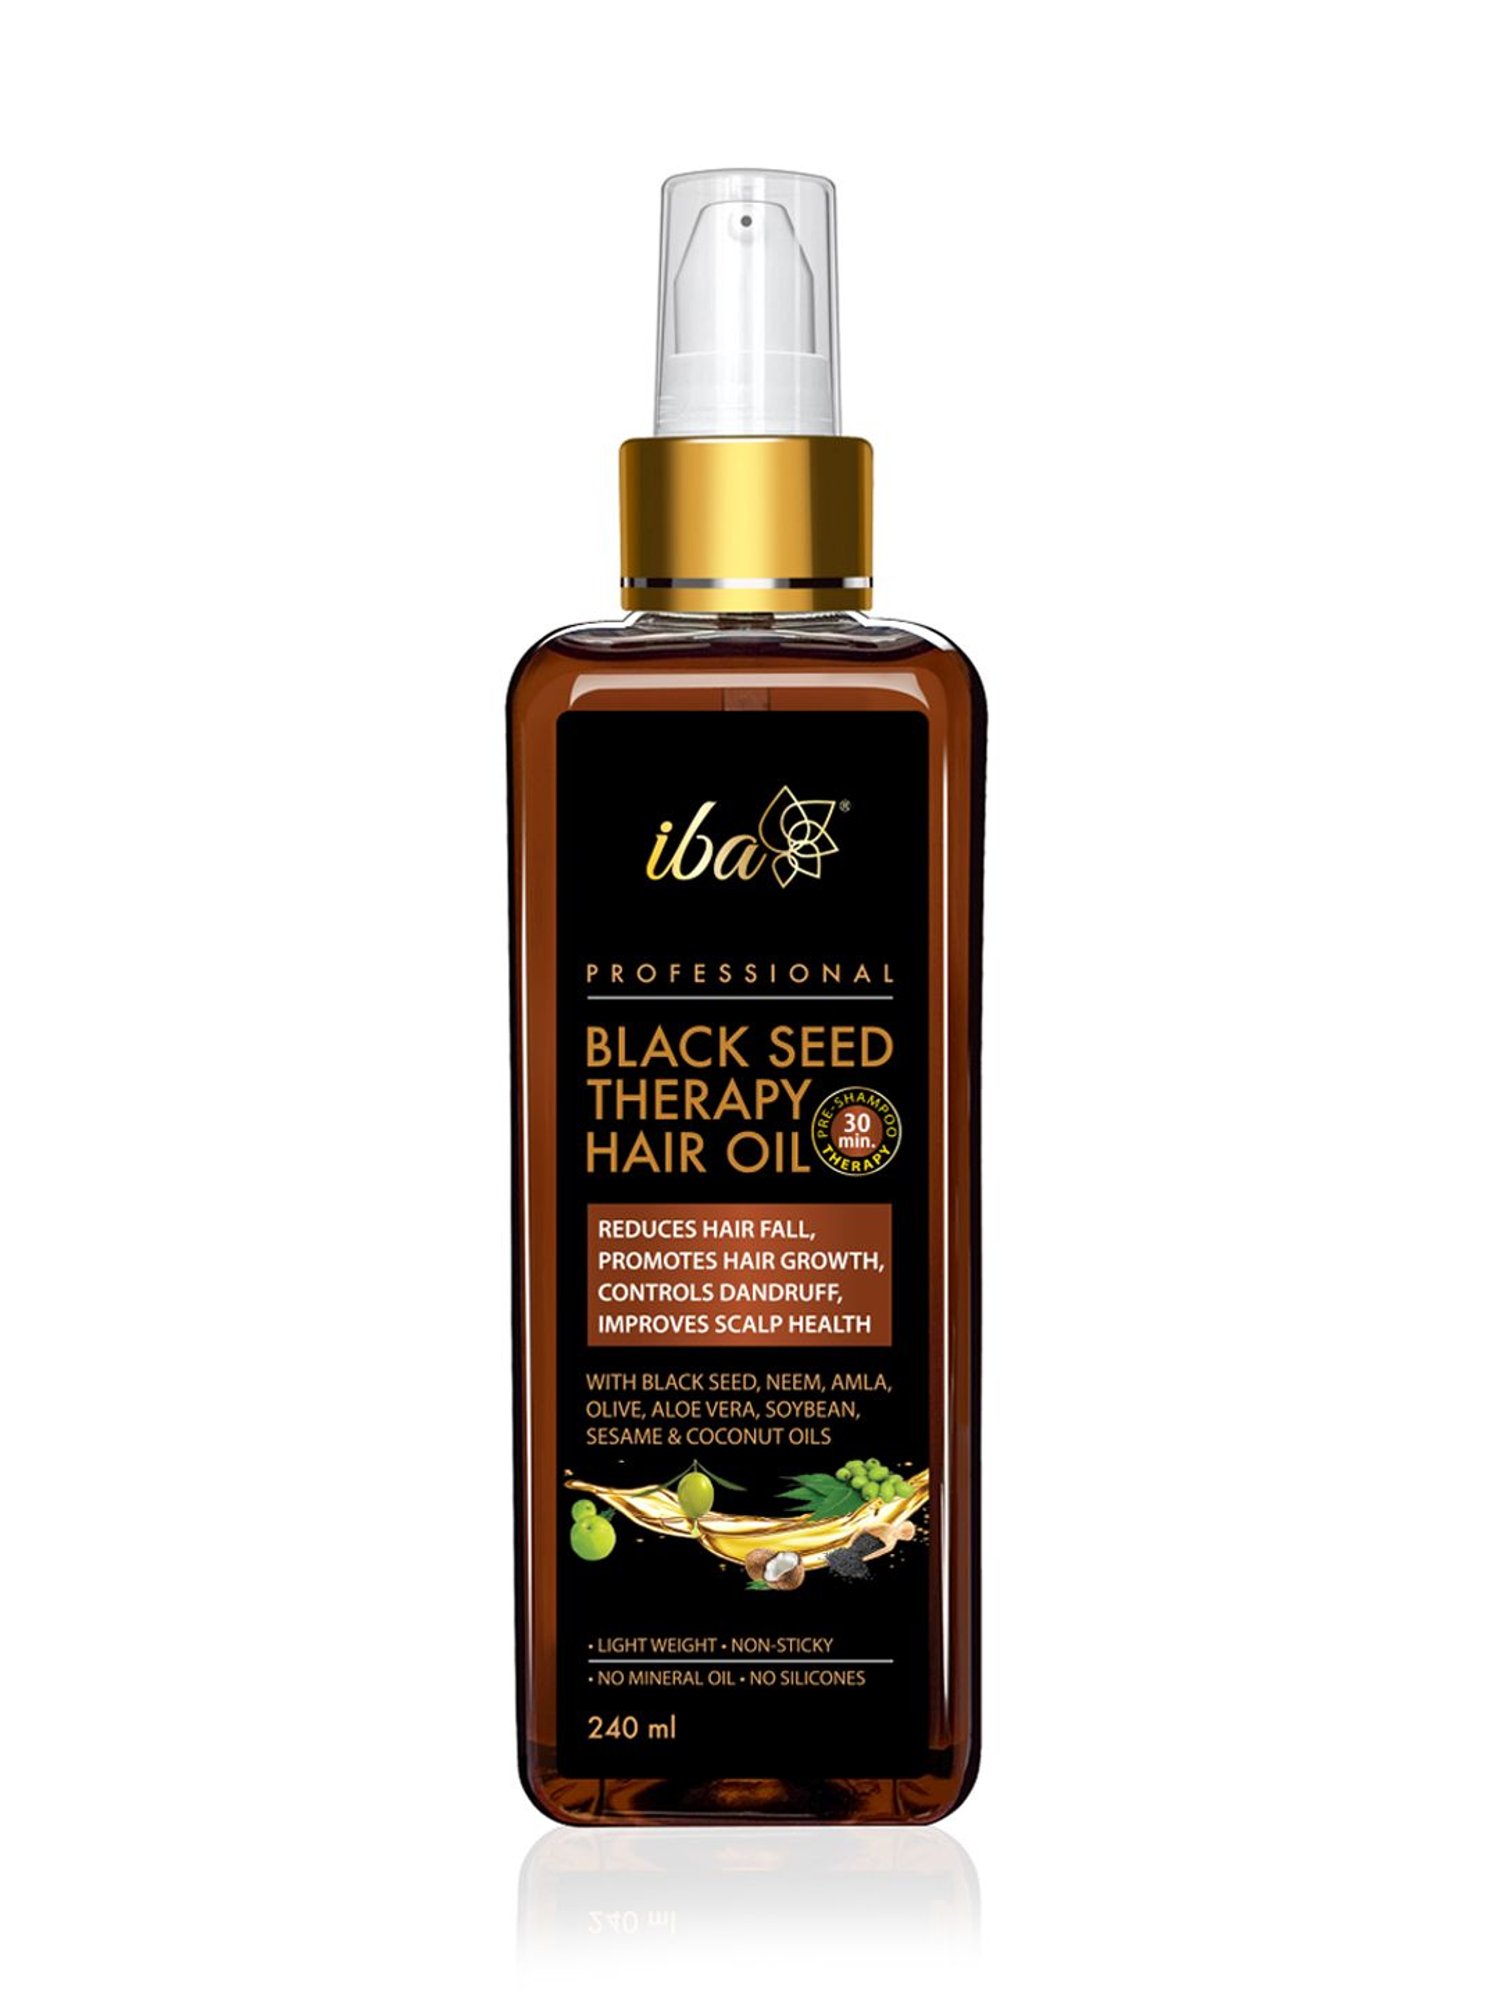 ARK Hair OIL  Beauty Product Supplier in Mithakhali